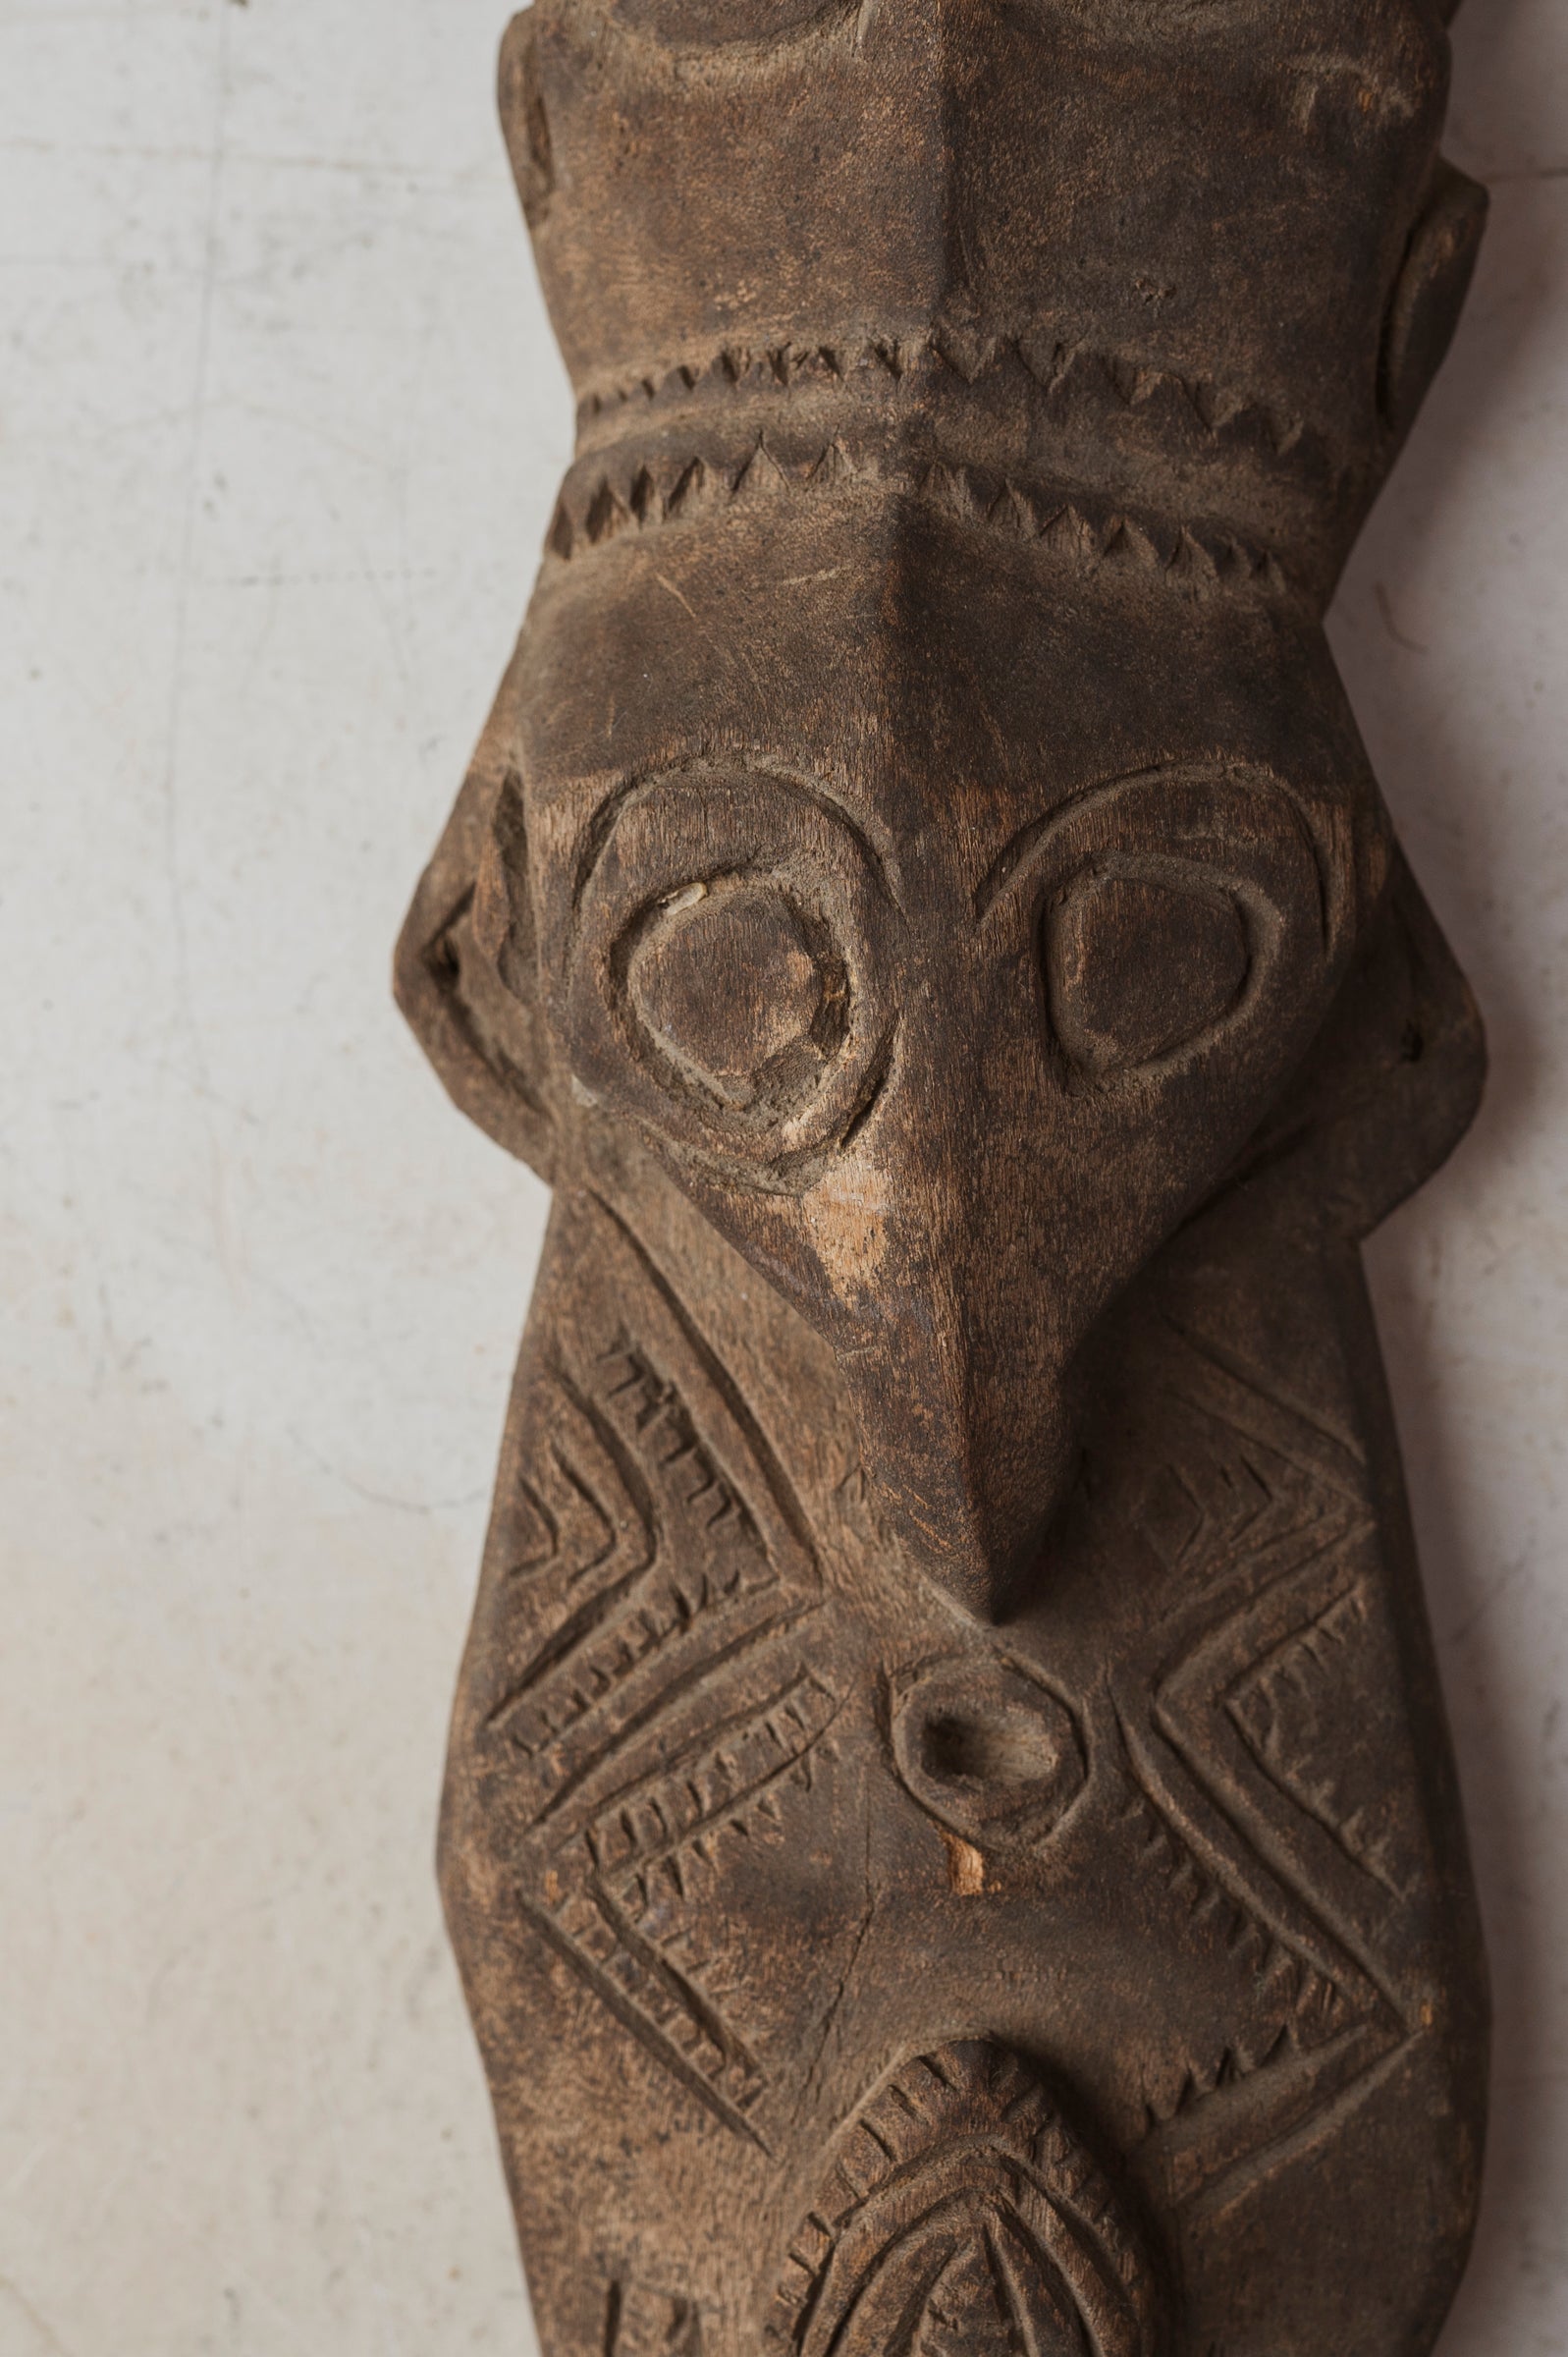 Handcarved Papua New Guinea Mask, HD983